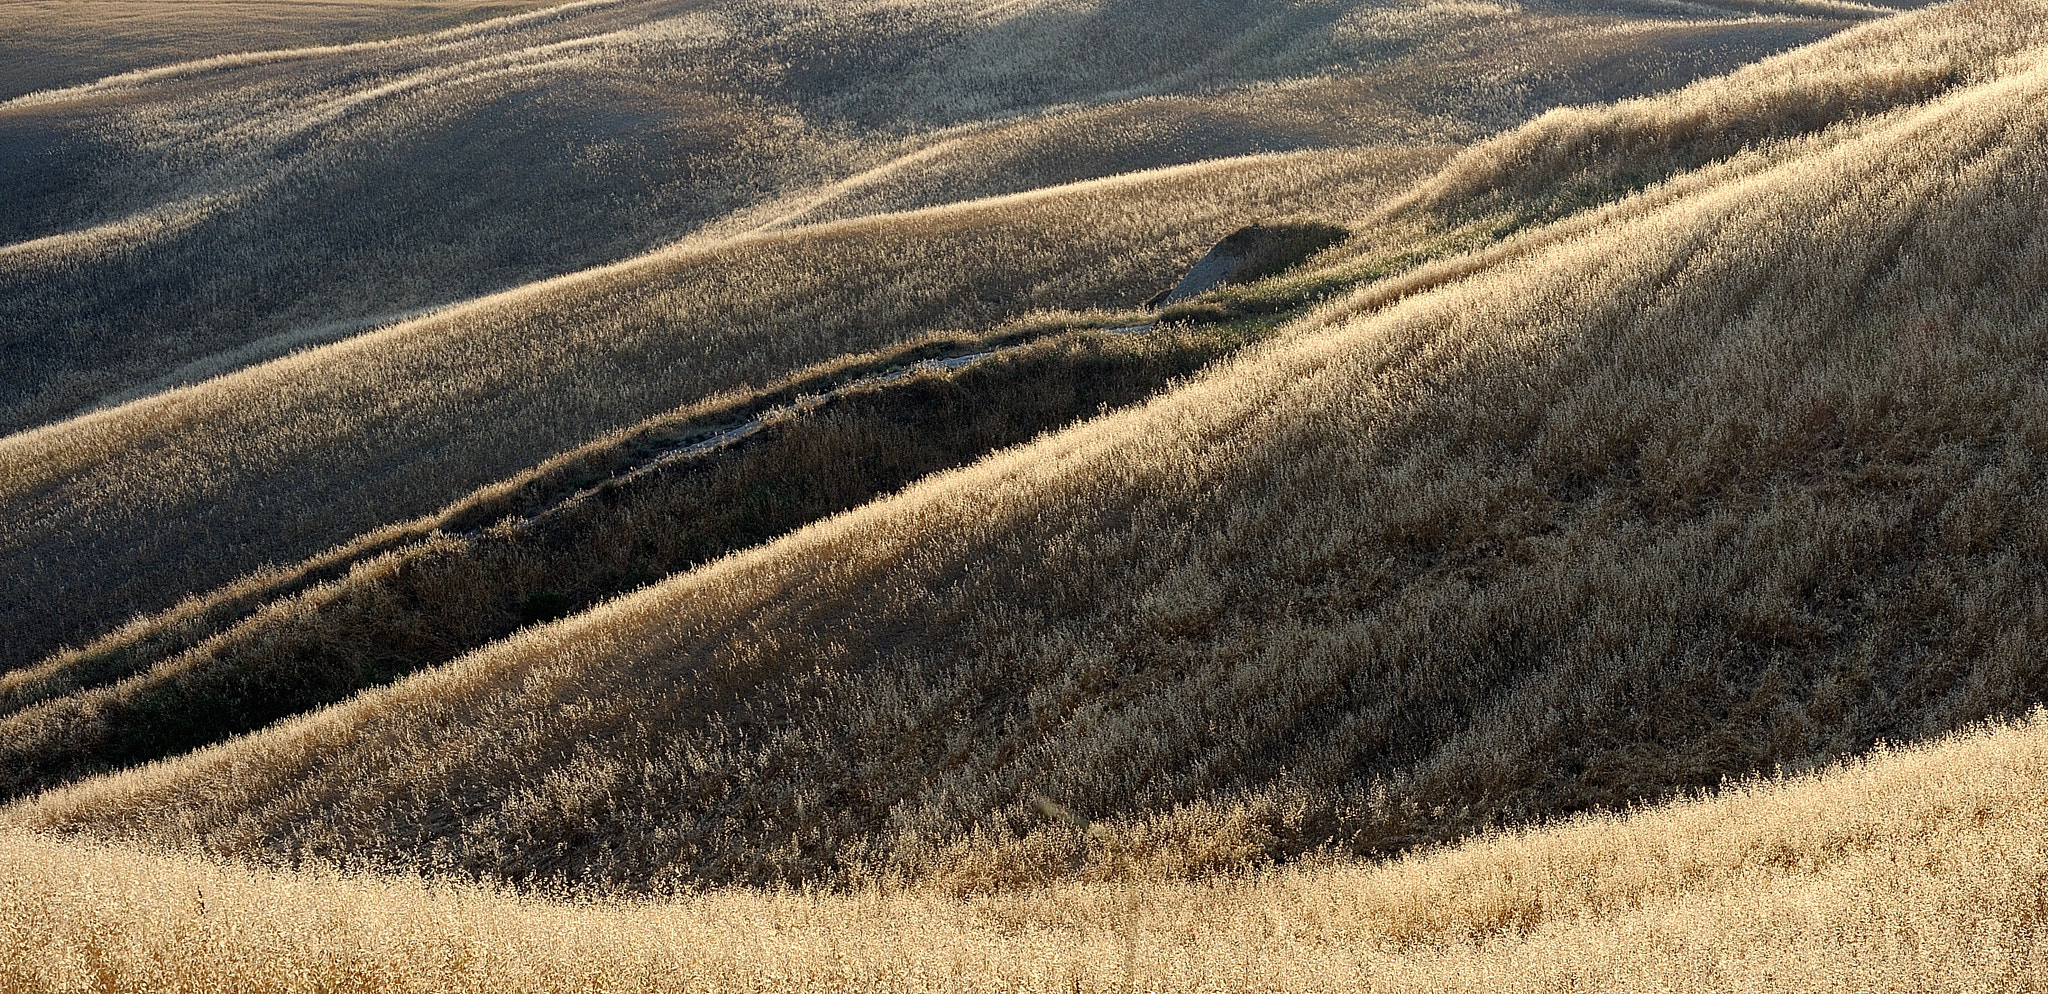 Nikon D700 sample photo. July and the rolling landscape of toscana photography